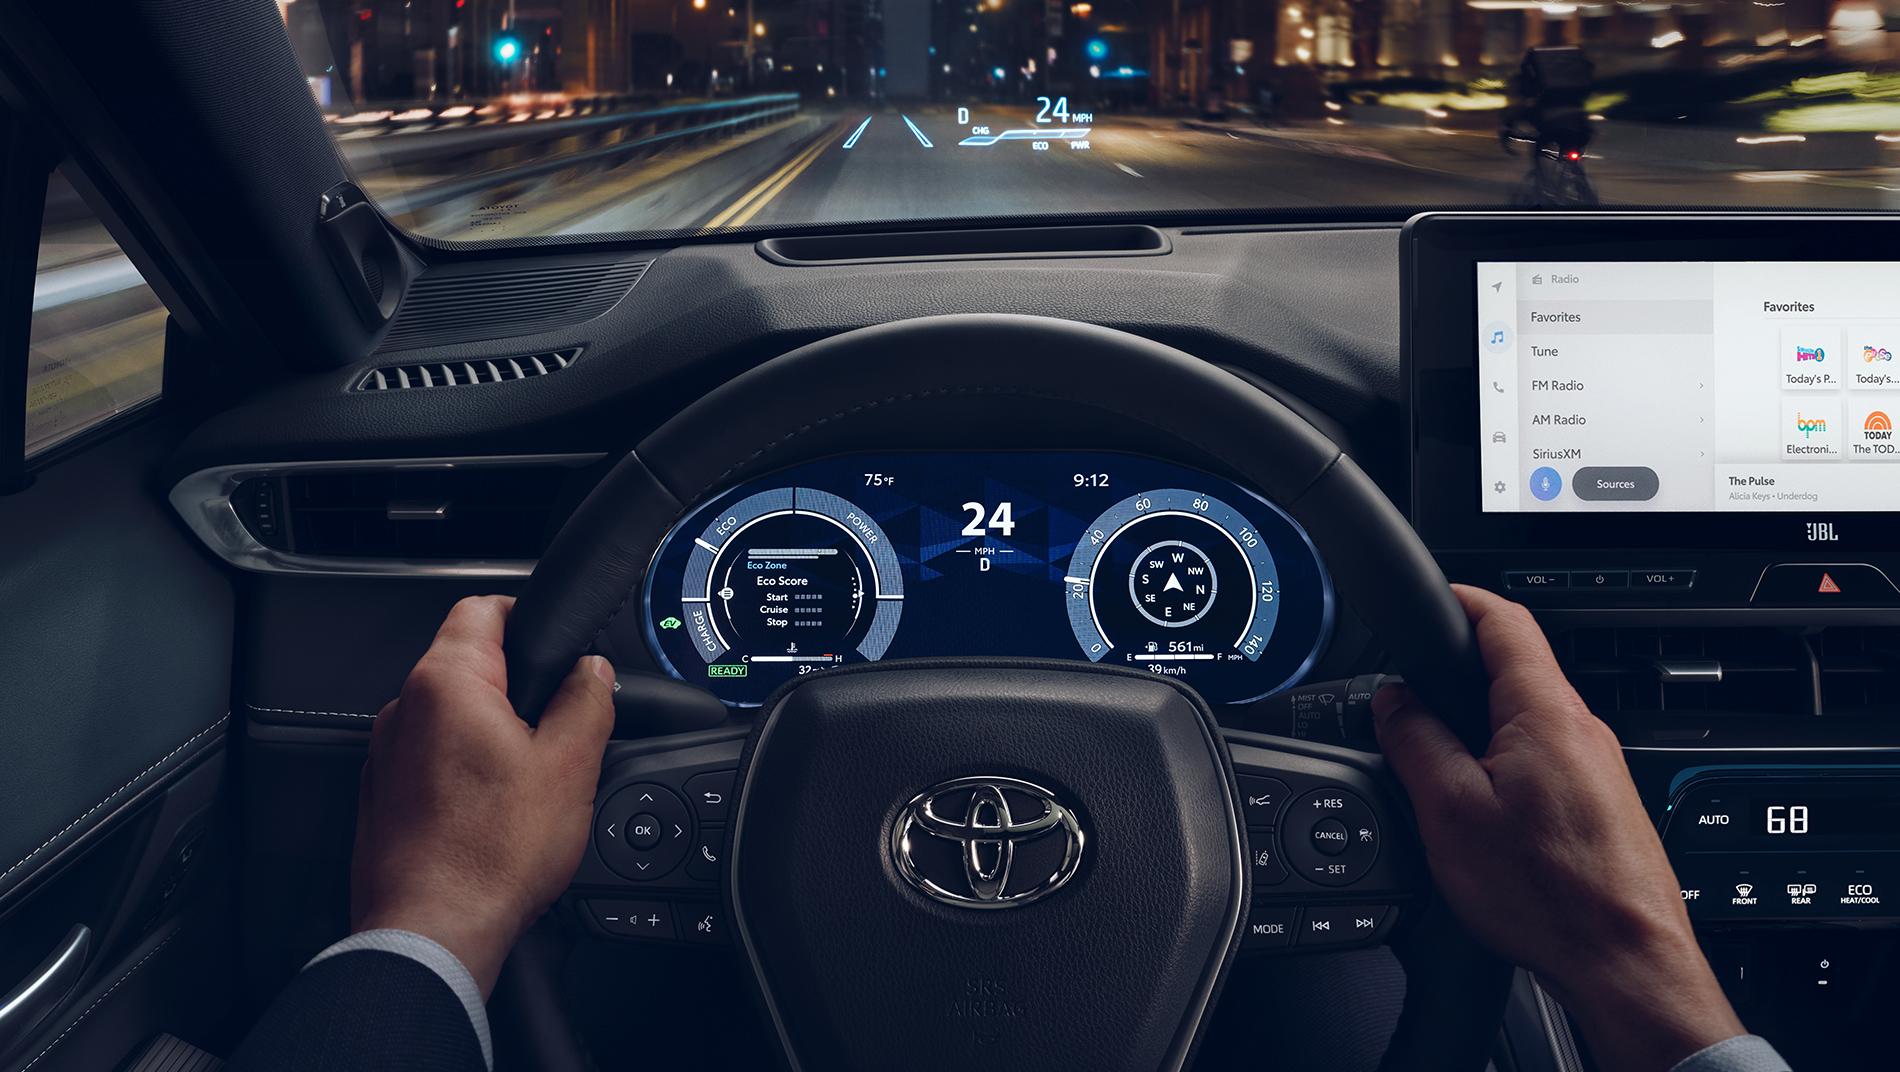 2024 Toyota Venza Hybrid inside looking out the front windshield driving down a city street at nightshowing touchscreen control panel, digital gague cluster, and heads up display showing important dashboard features on the windshield.